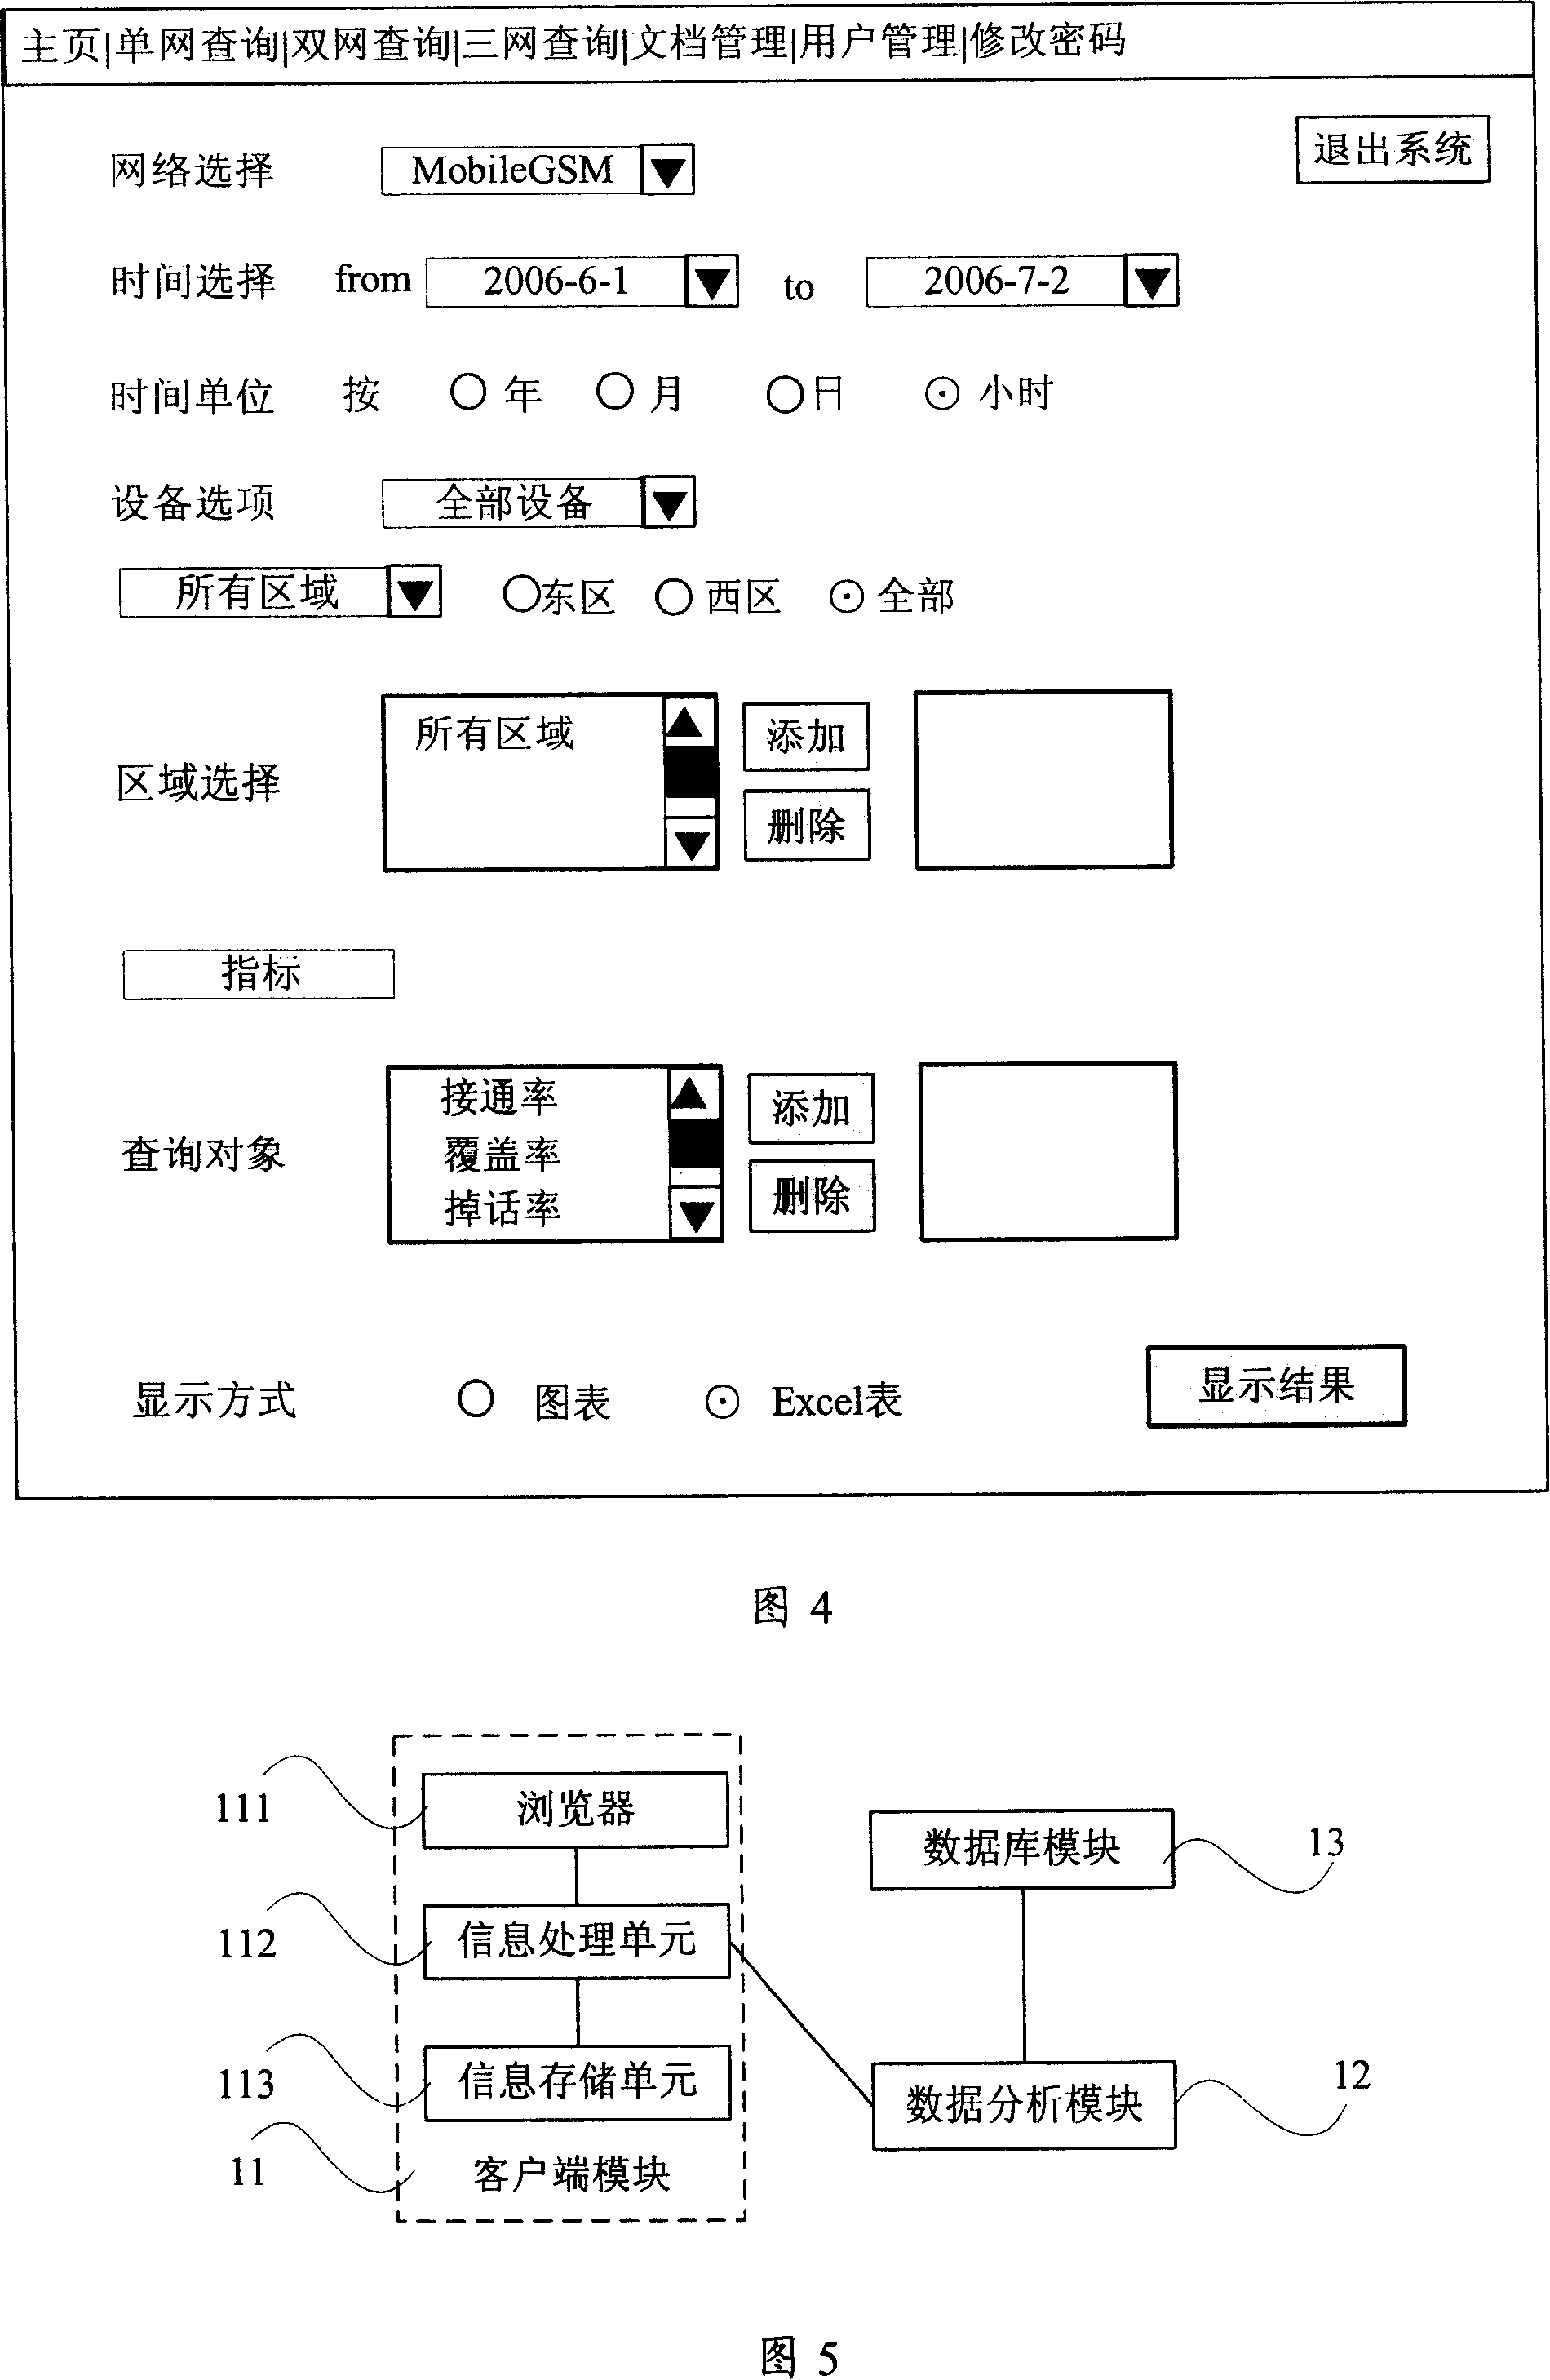 Network performance analysis system and method